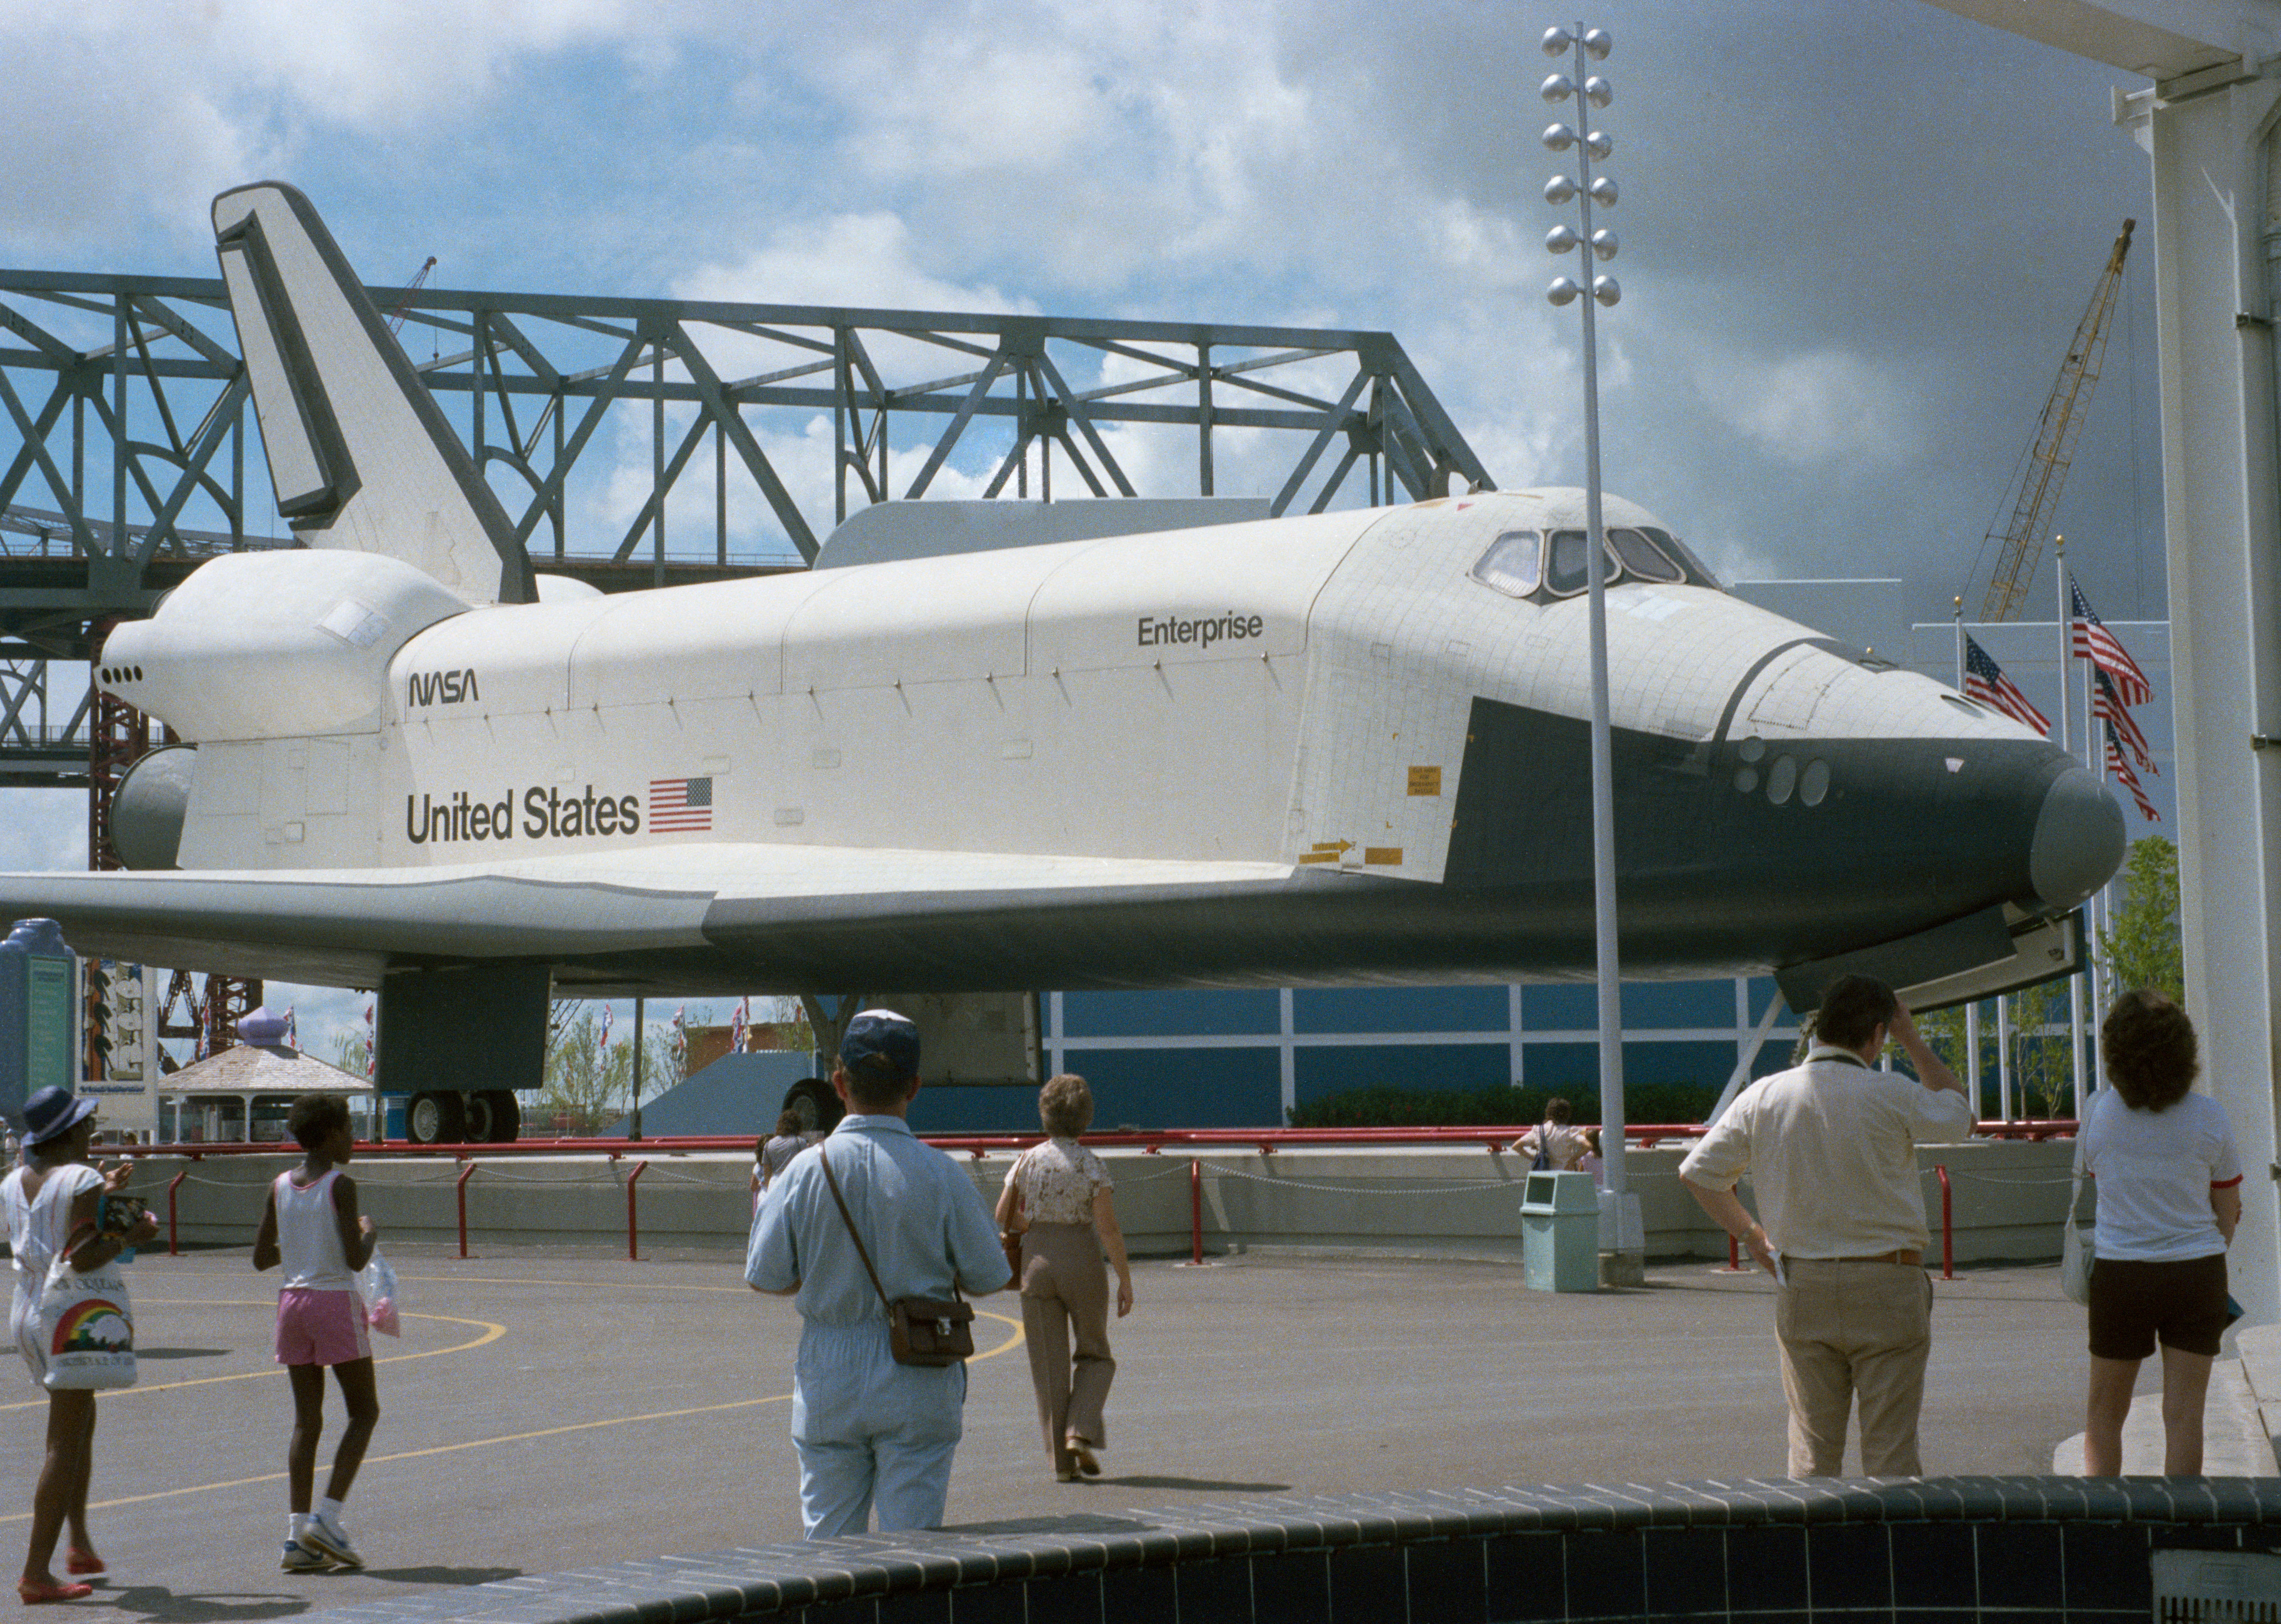 Enterprise on display at the World’s Fair in New Orleans in 1984